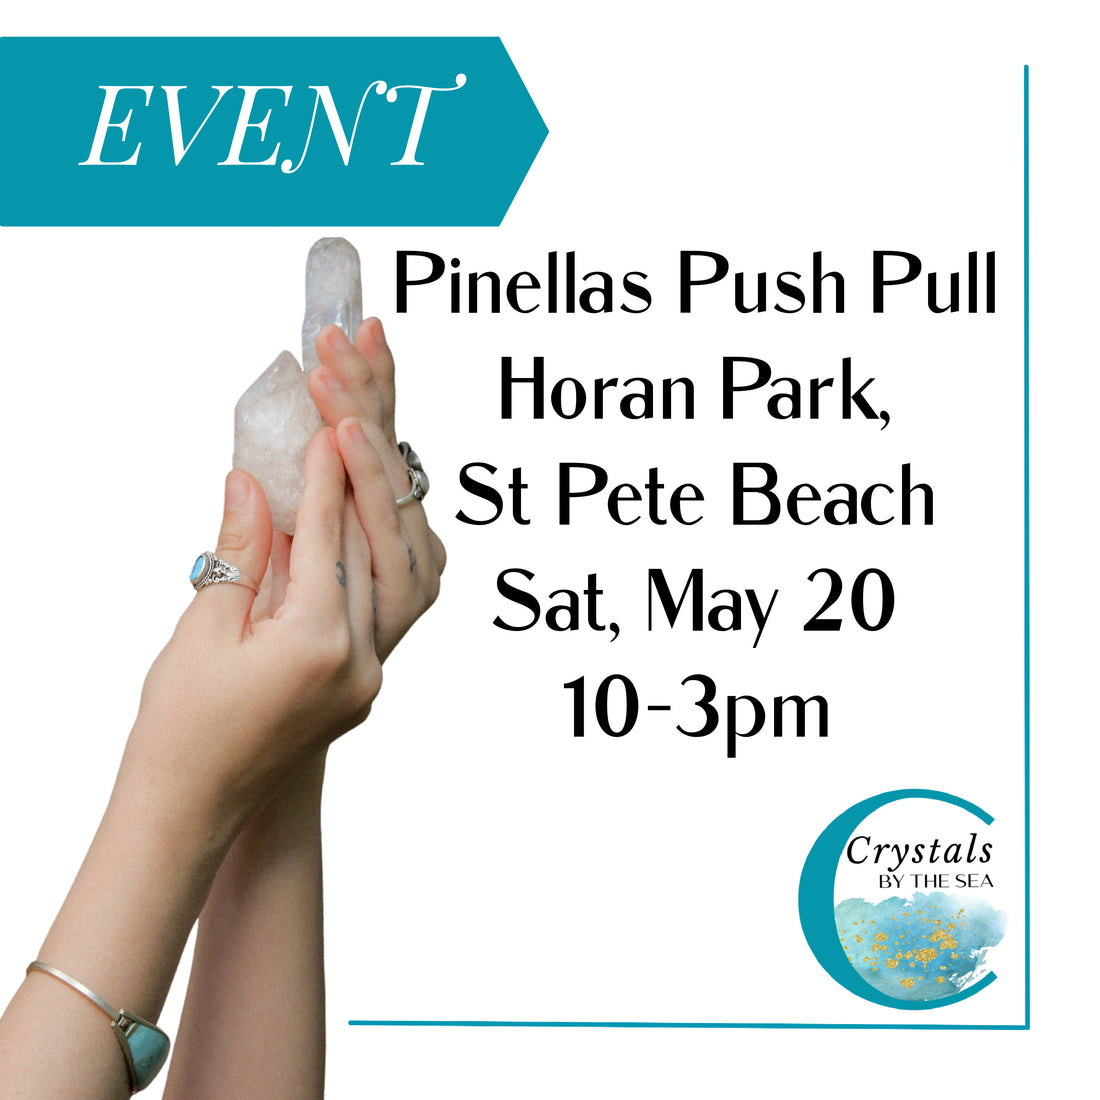 6 Reasons to Attend the Pinellas Push Pull Event in St Pete Beach on May 20 2023